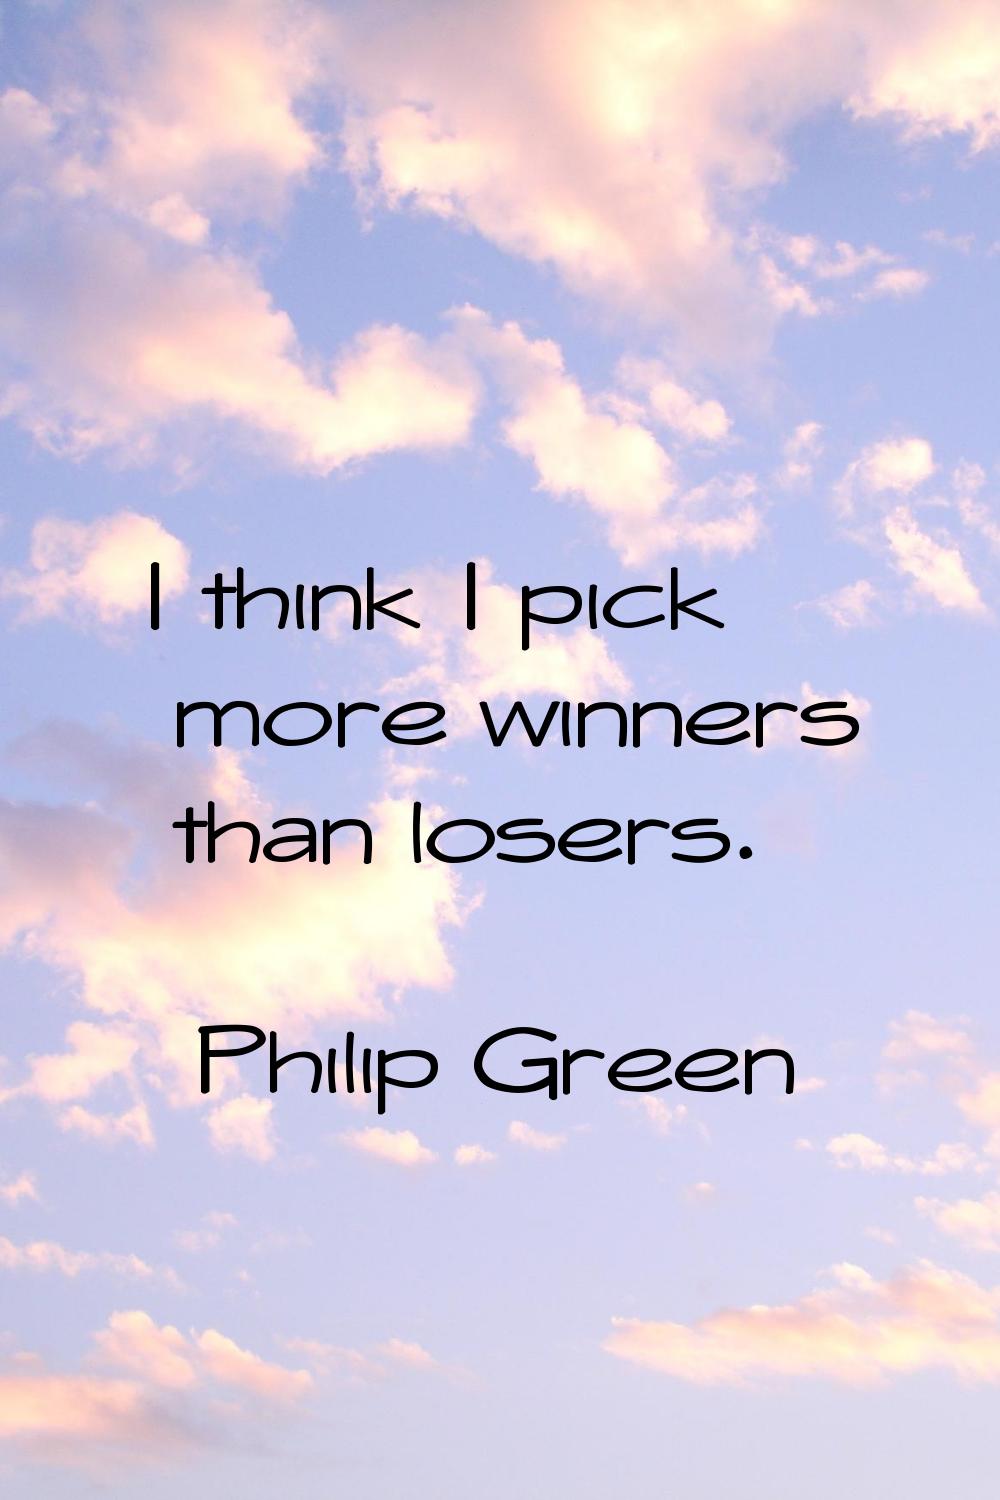 I think I pick more winners than losers.